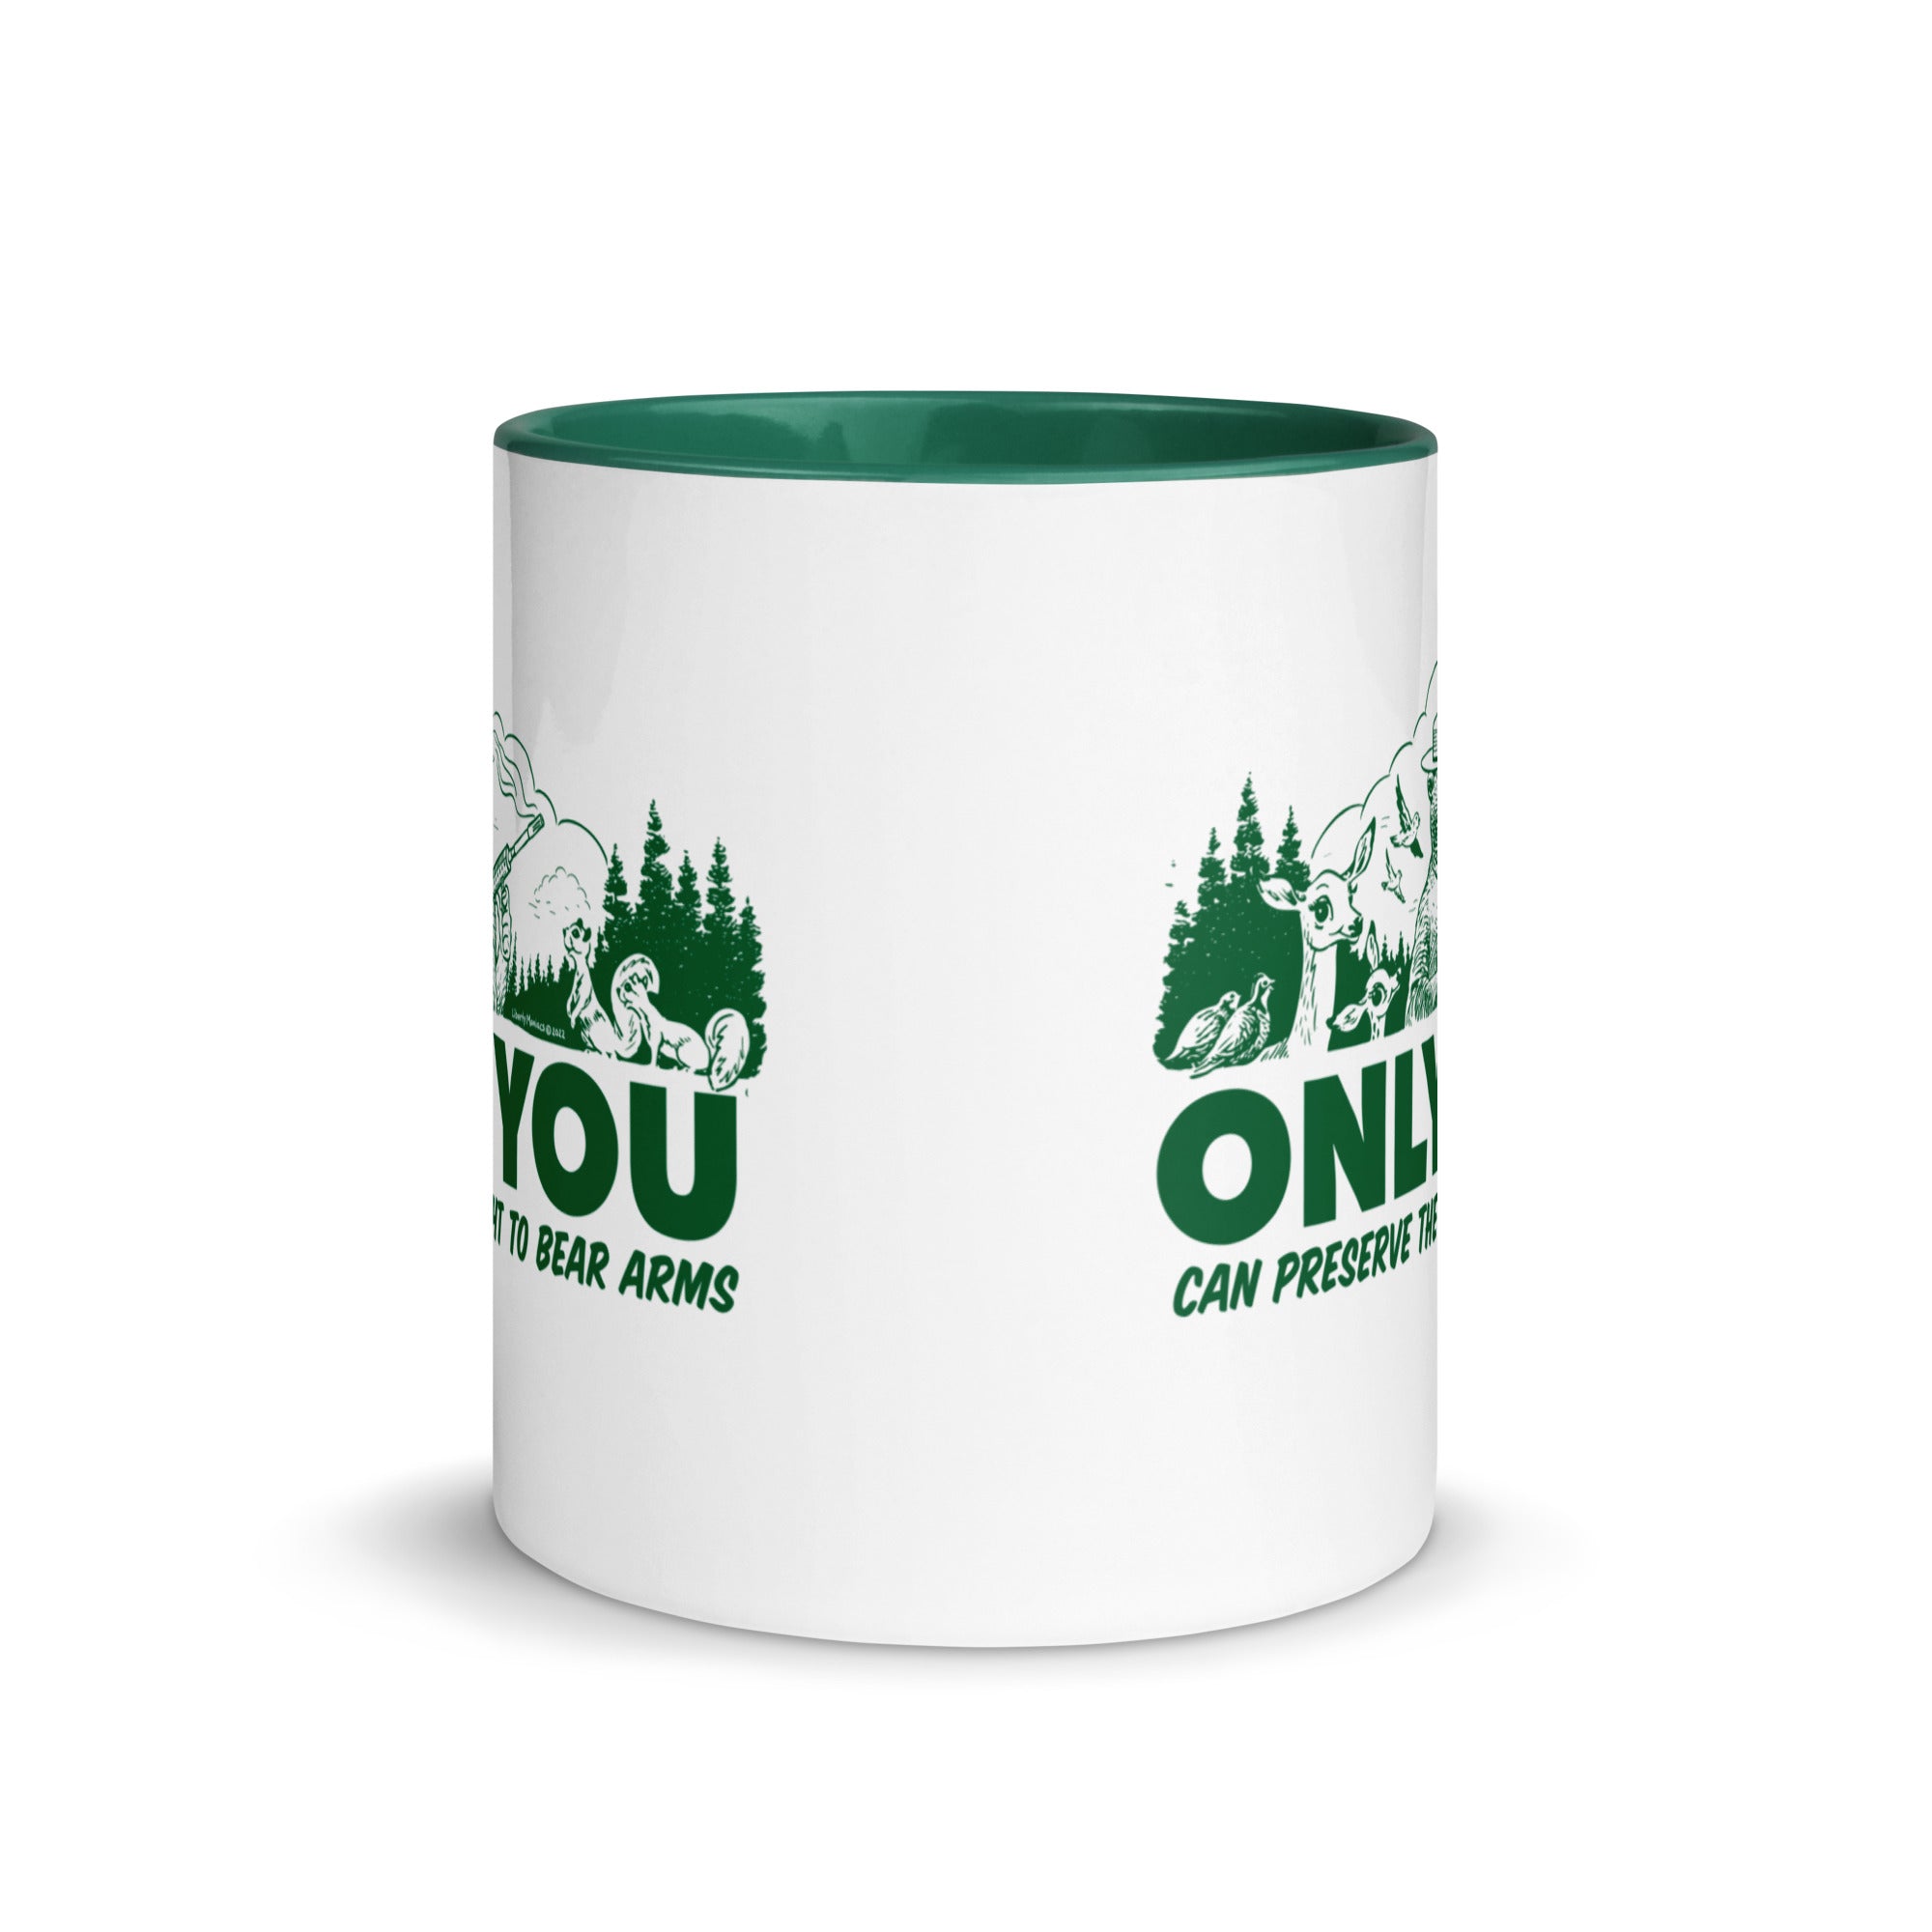 Only You Can Preserve the Right To Bear Arms Color Mug